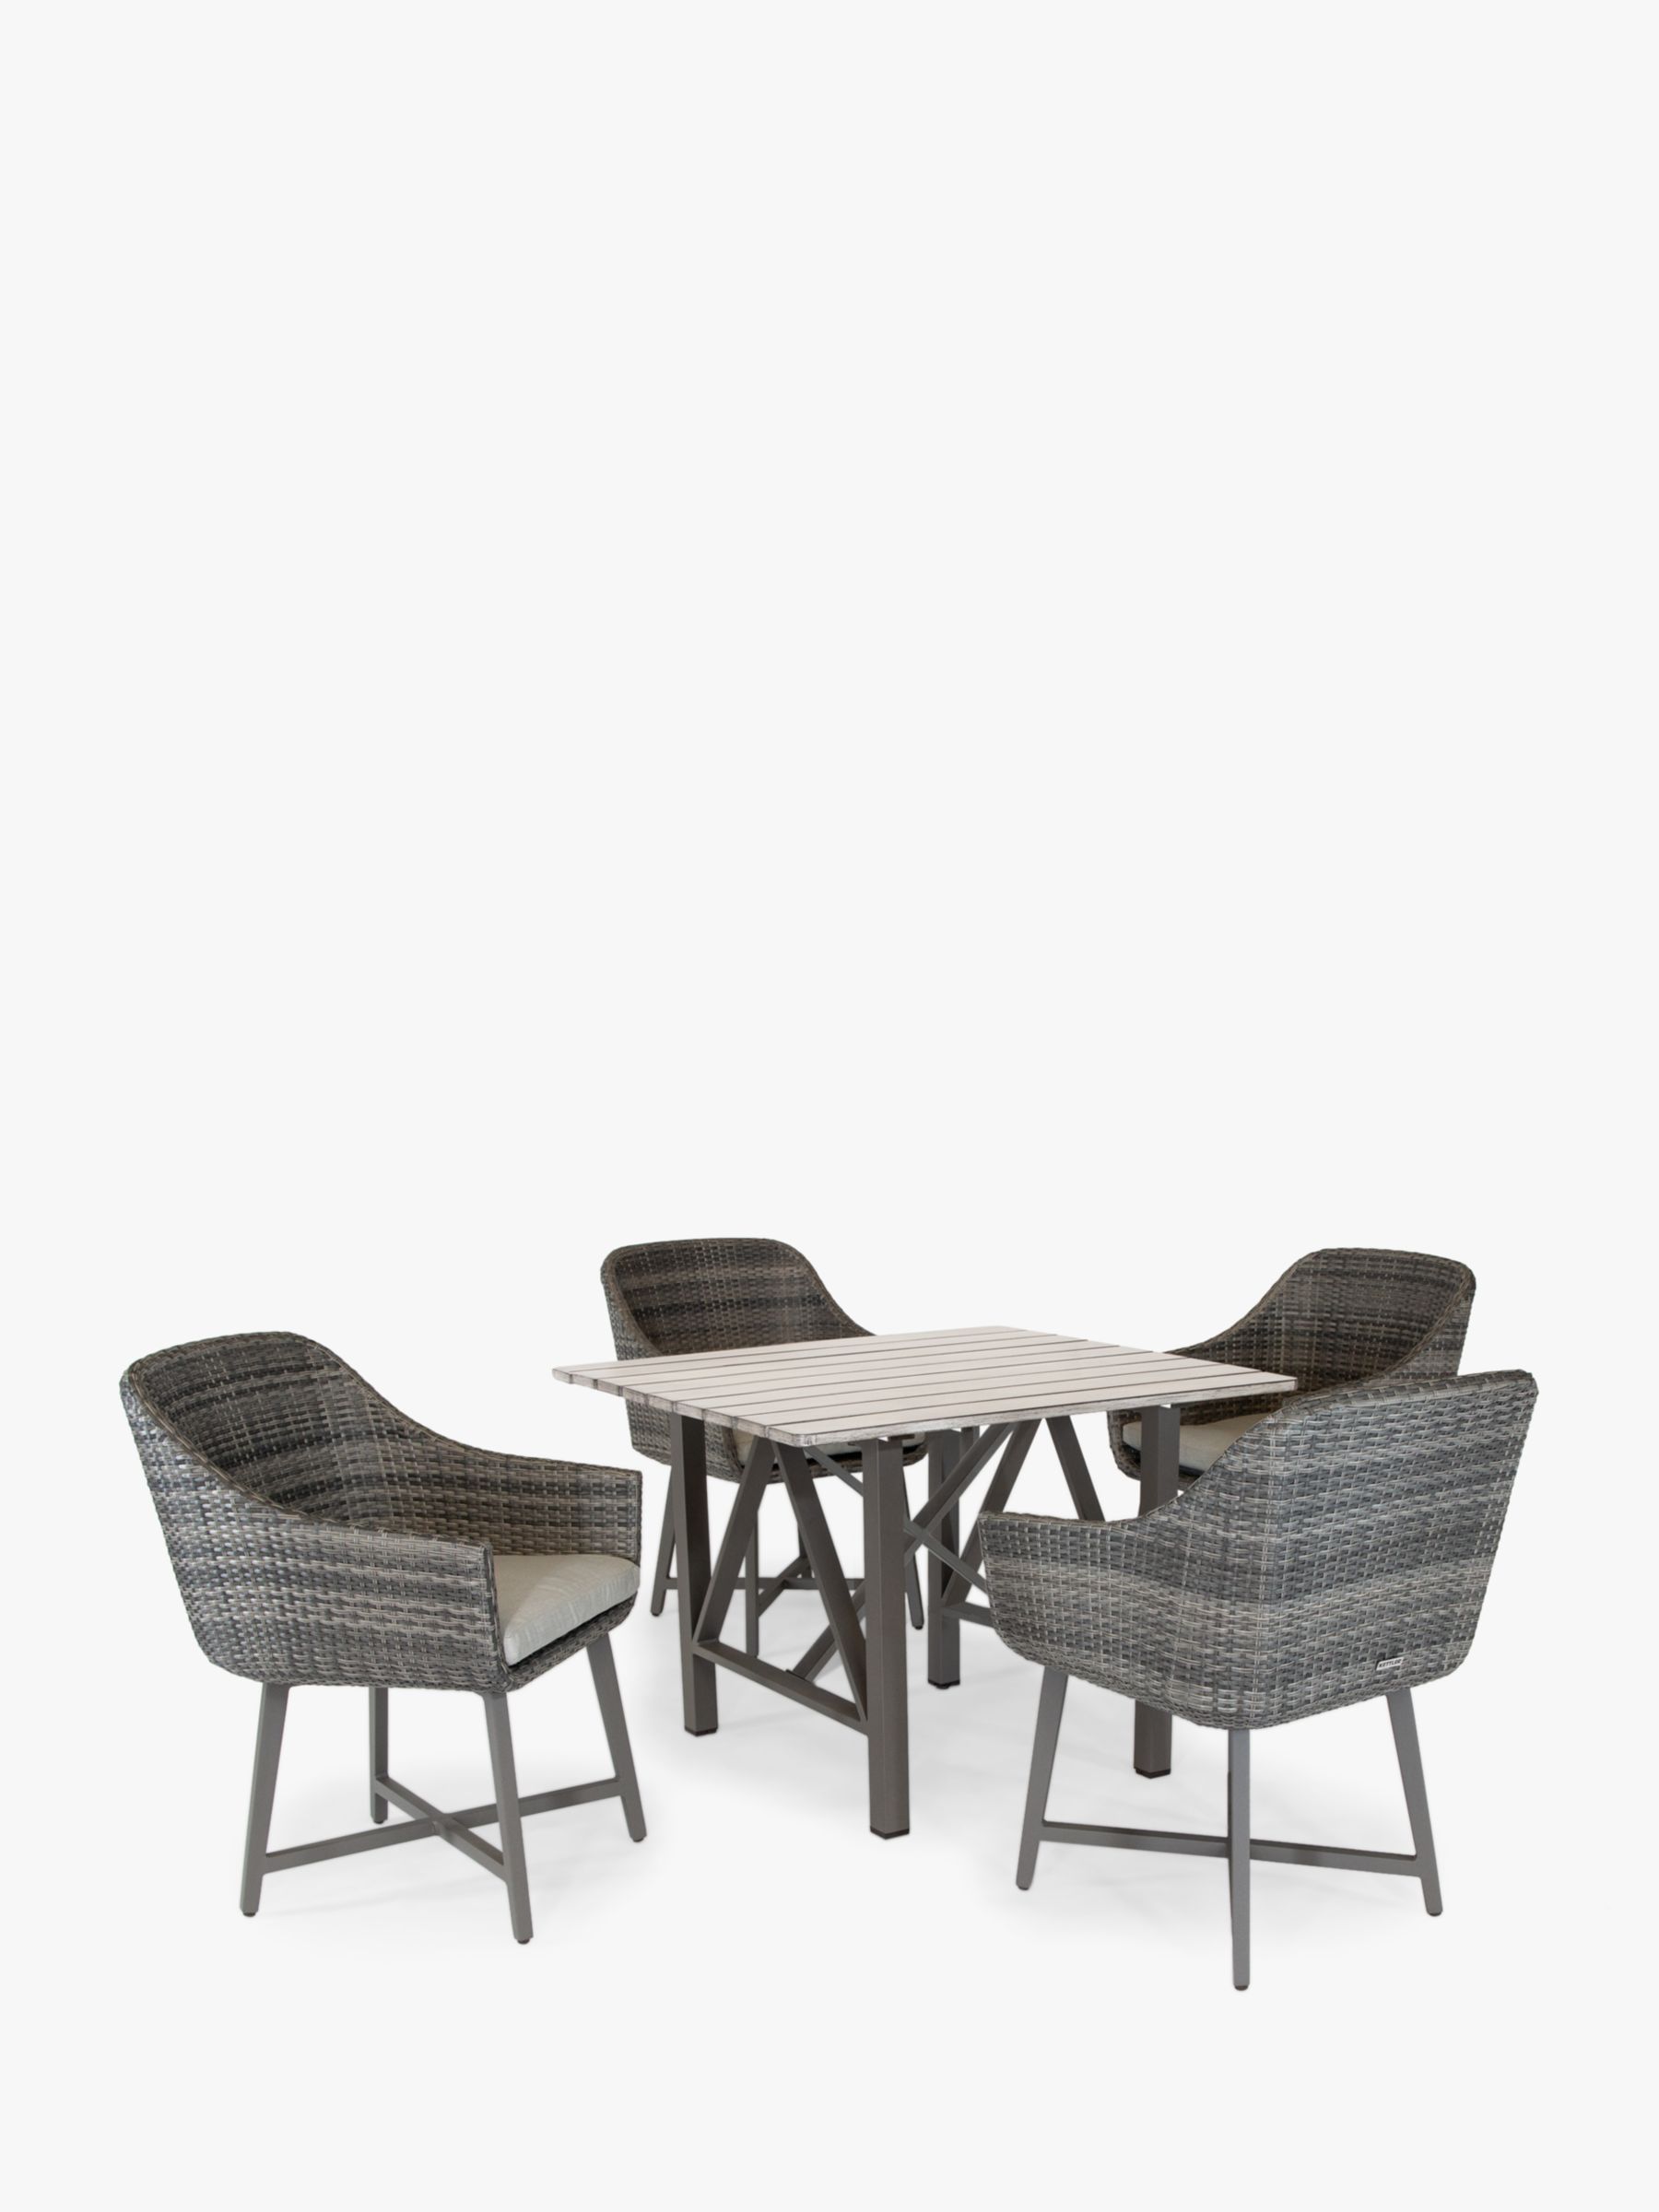 Photo of Kettler lamode 4 seat garden dining table and chairs set brown